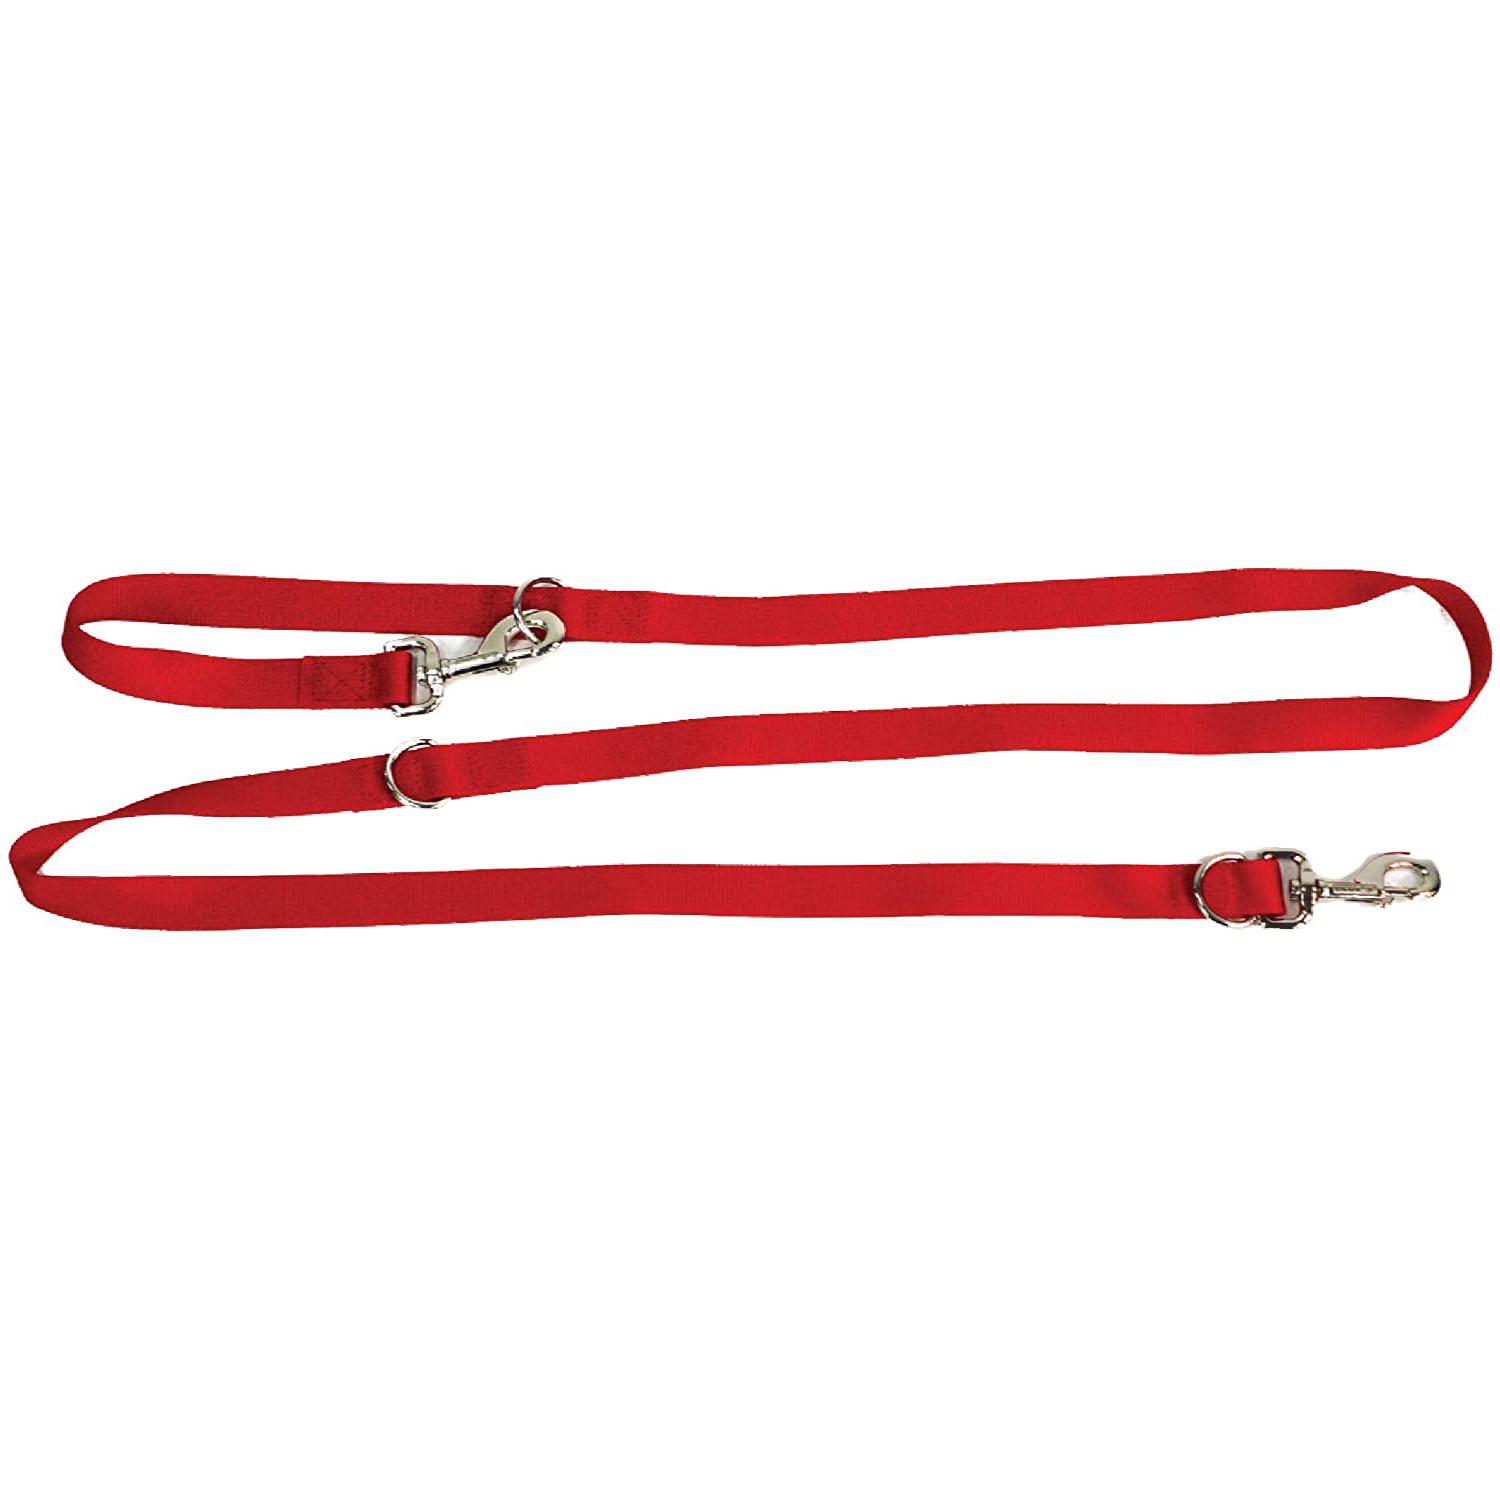 Blue-9 Multi-Function Leash - Red